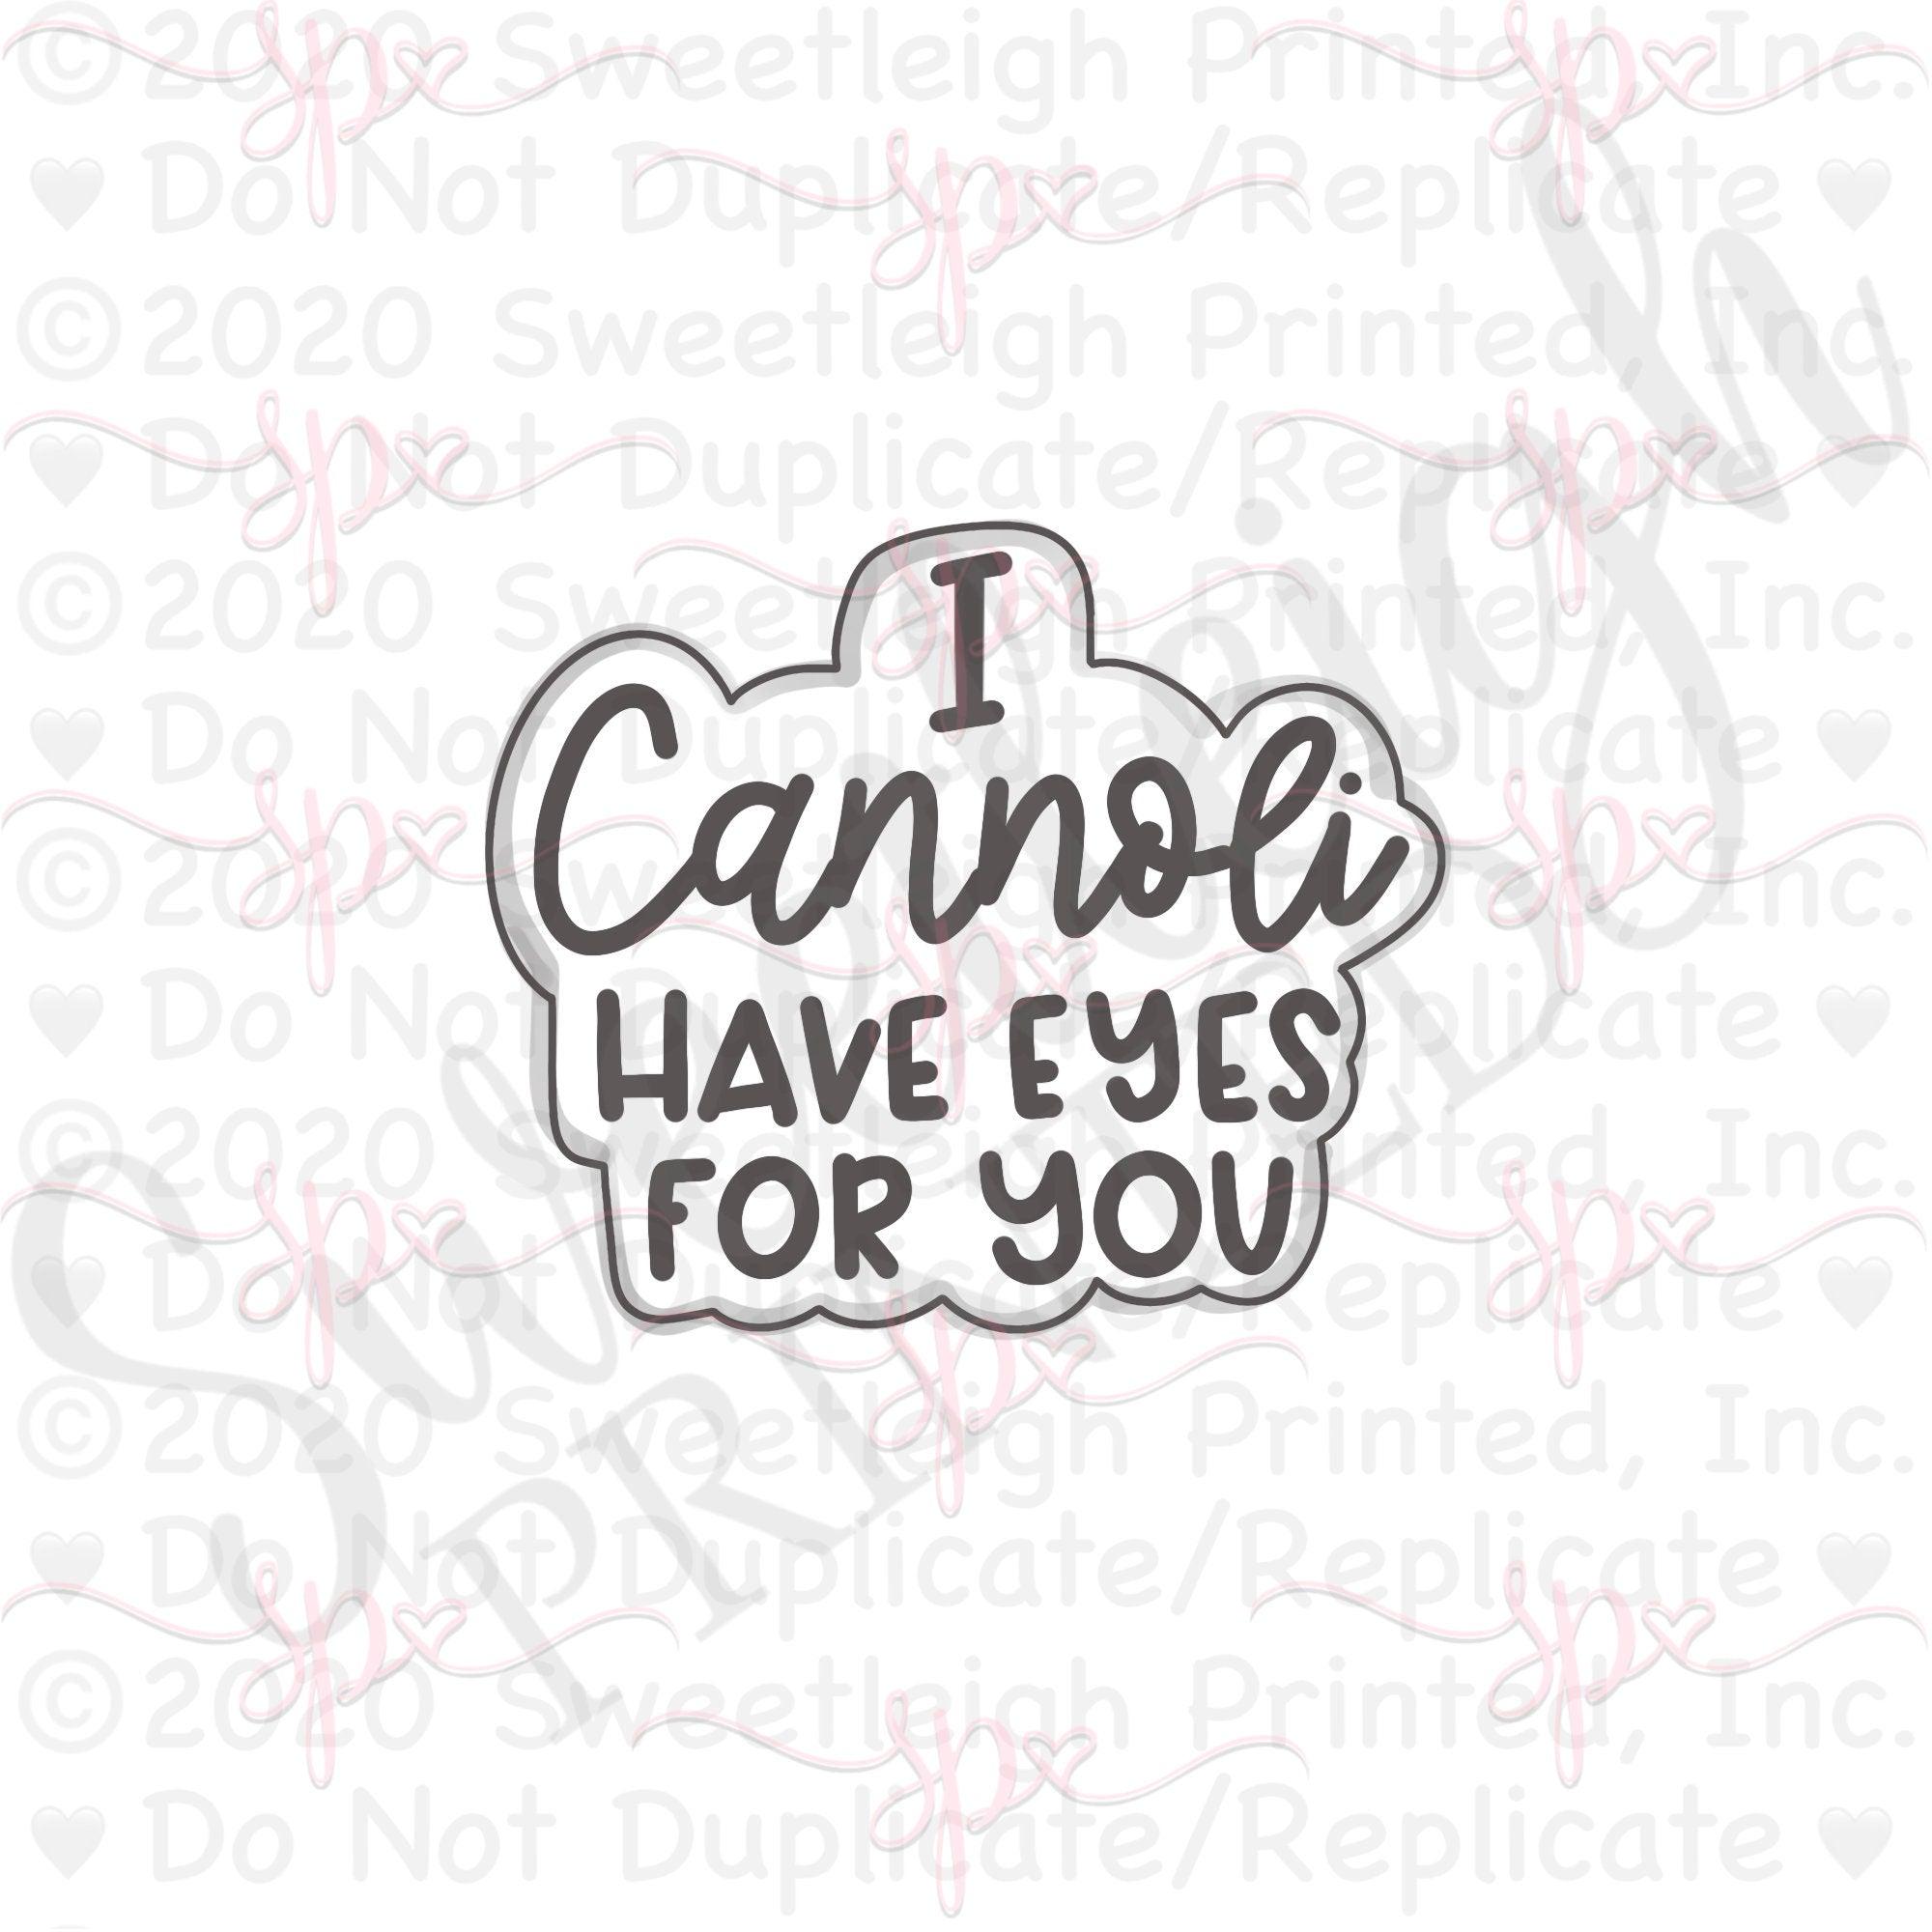 I Cannoli Have Eyes For You Hand Lettered Cookie Cutter - Sweetleigh 